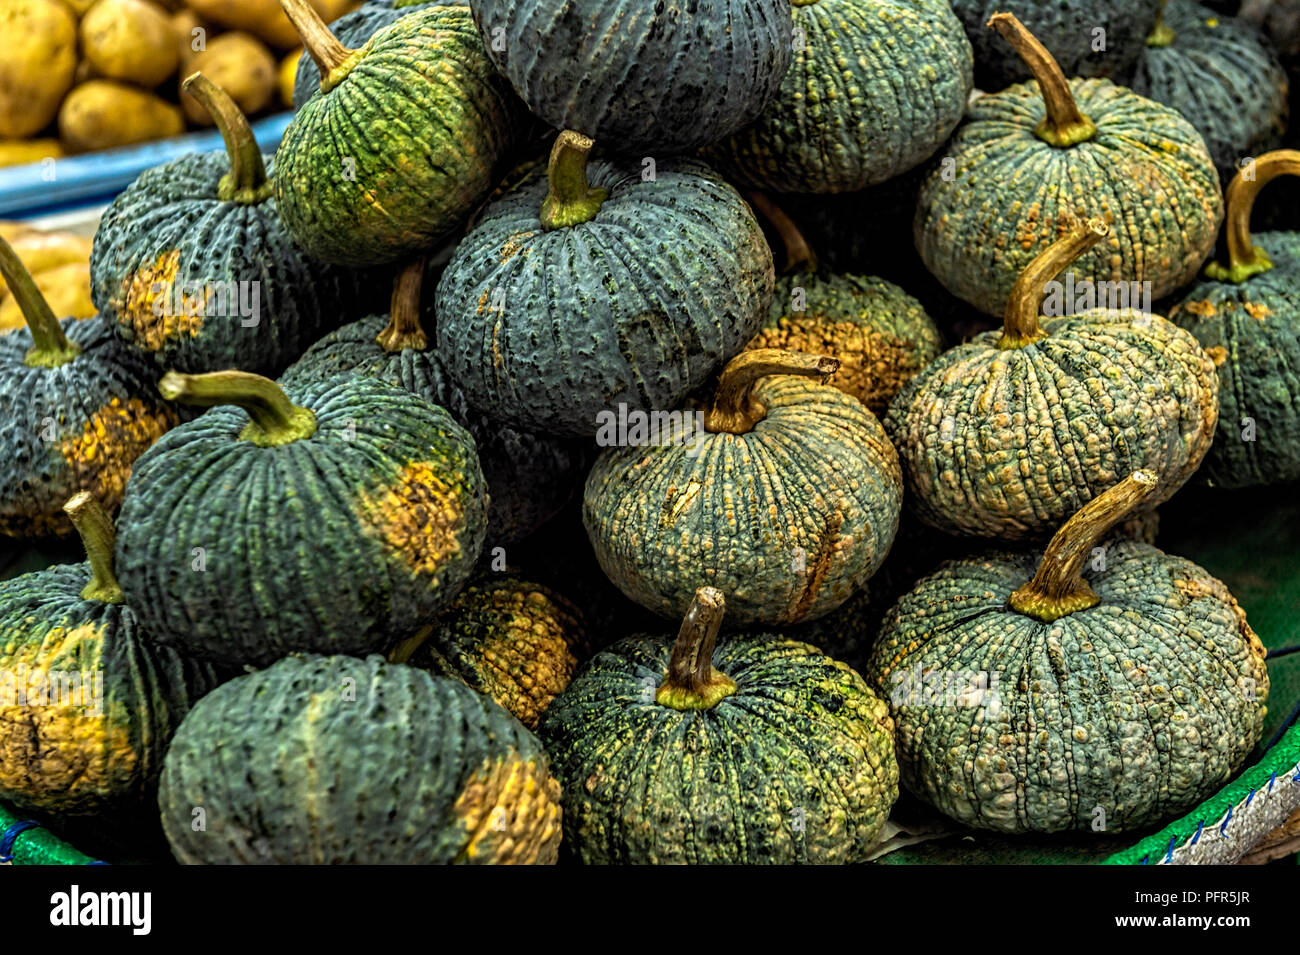 Gourds for sale at a market in Bangkok Thailand Stock Photo